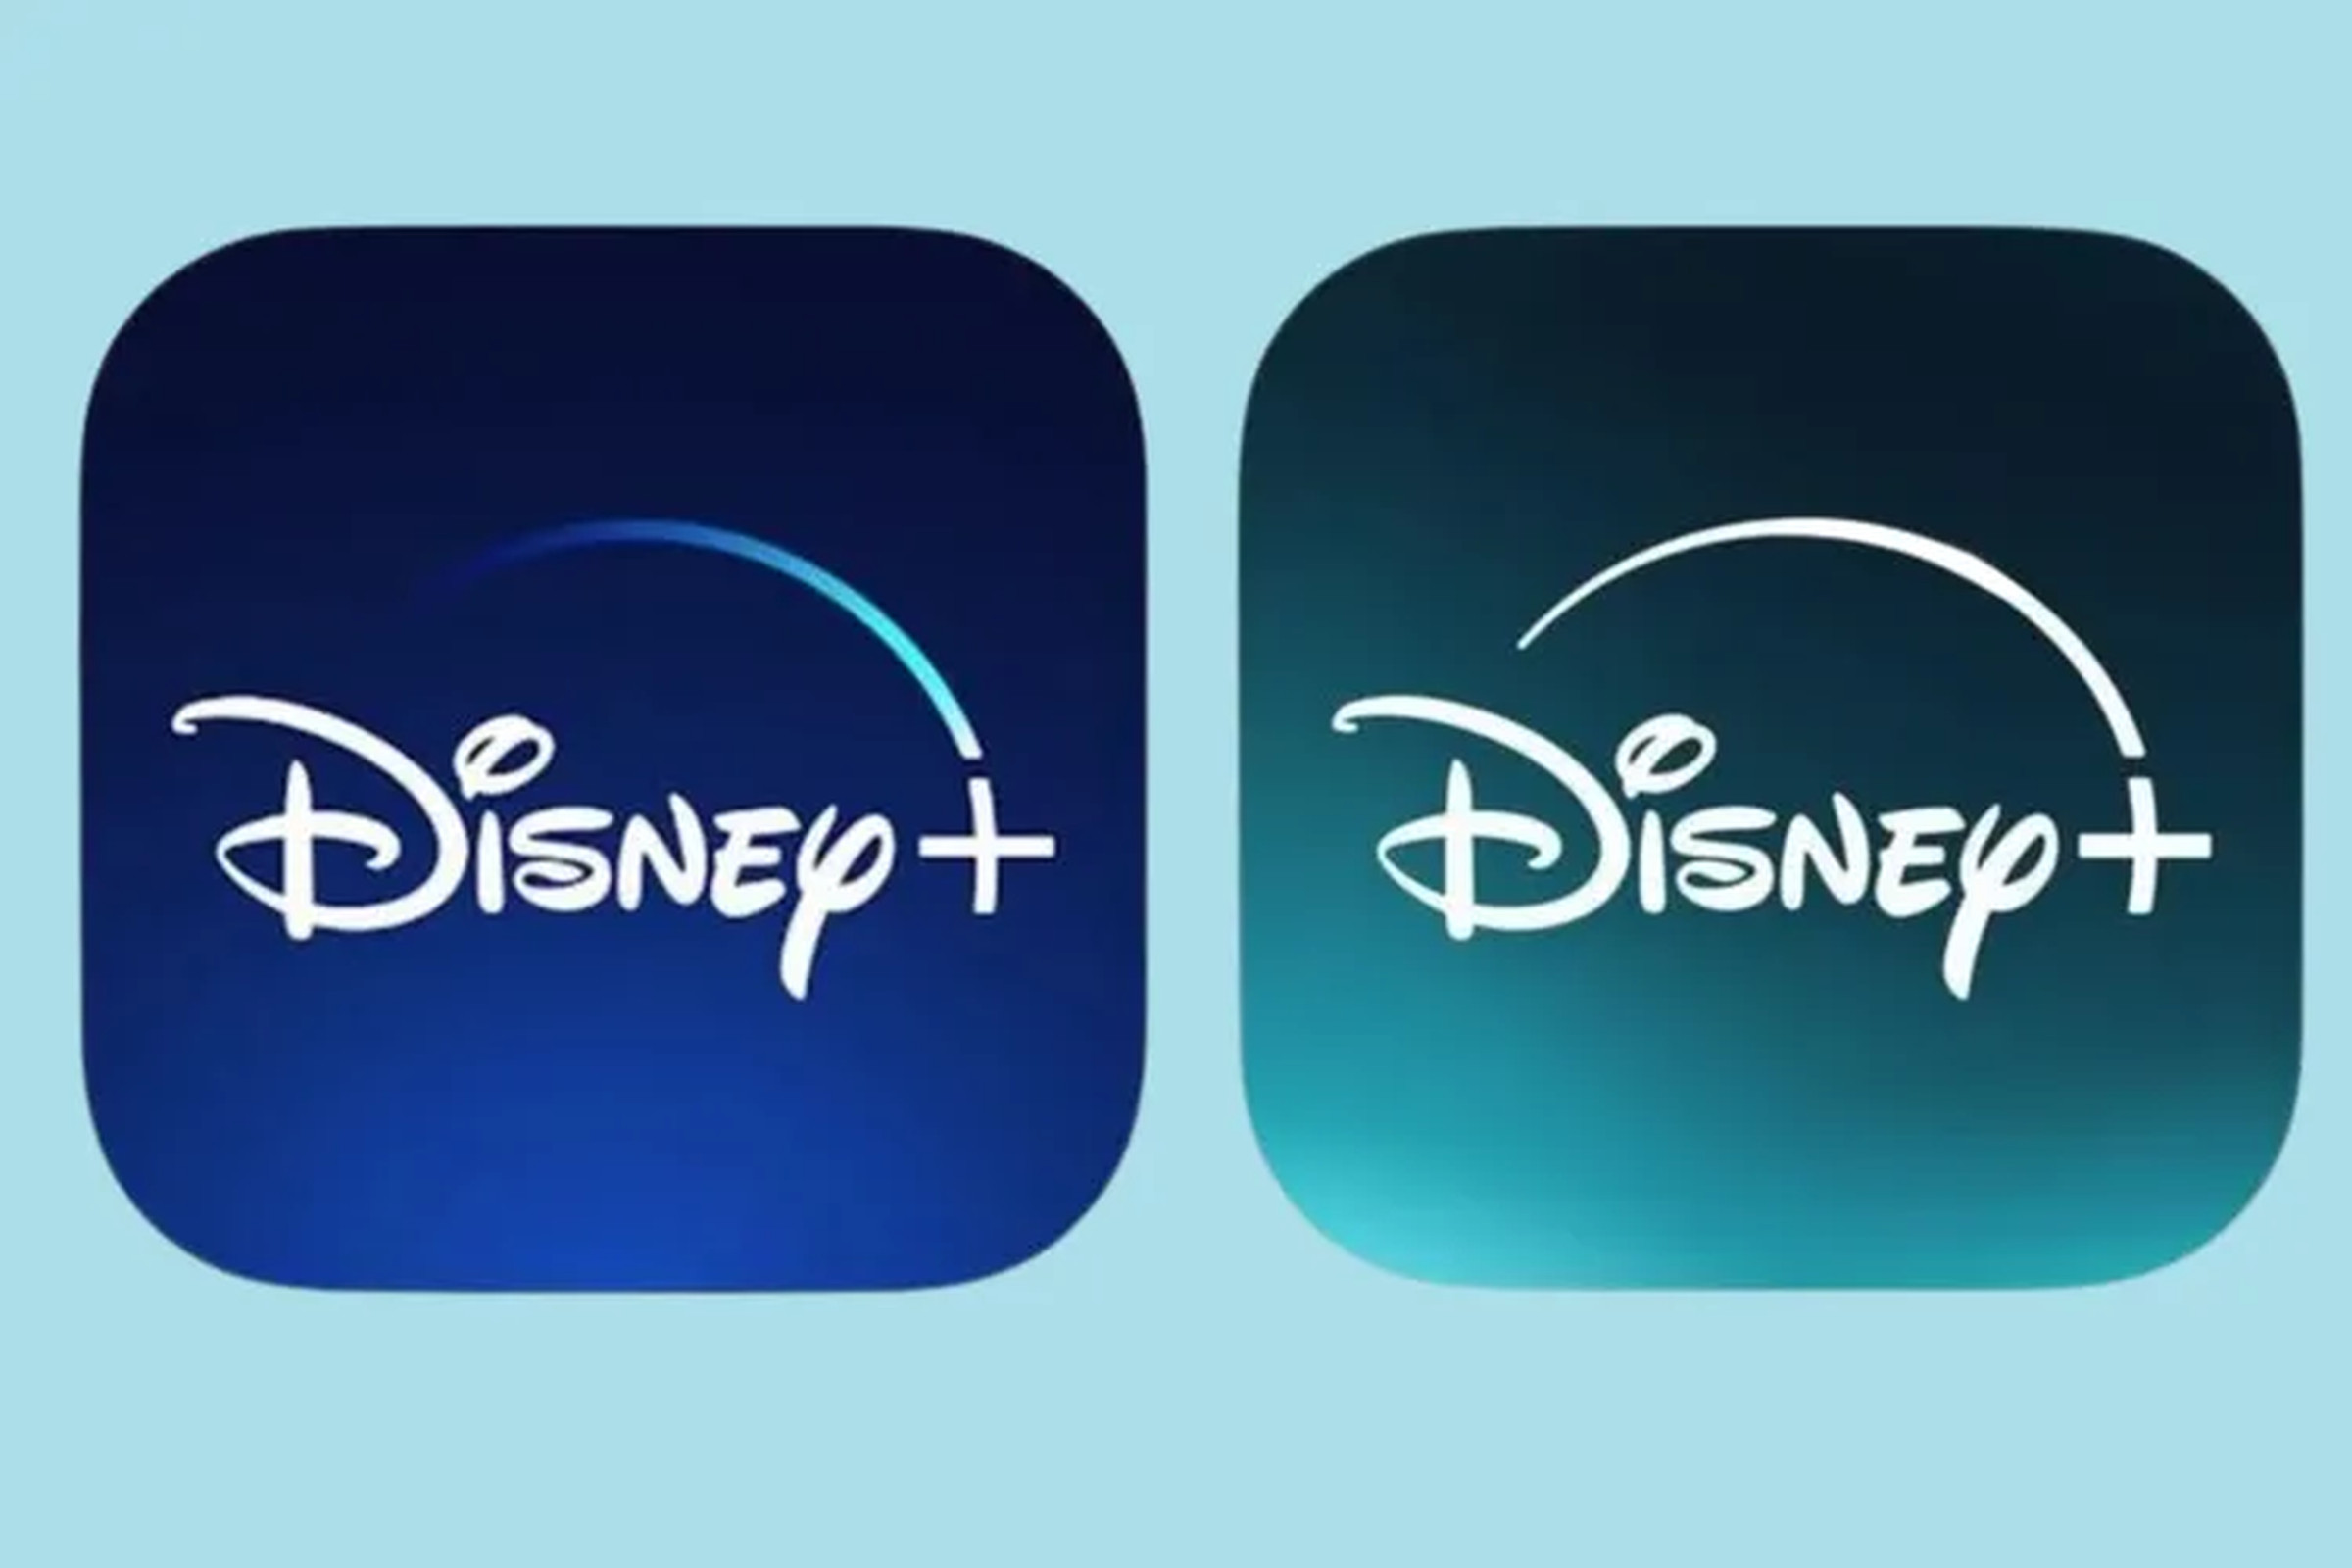 A comparison of the Disney Plus logo before and after Hulu content was added.